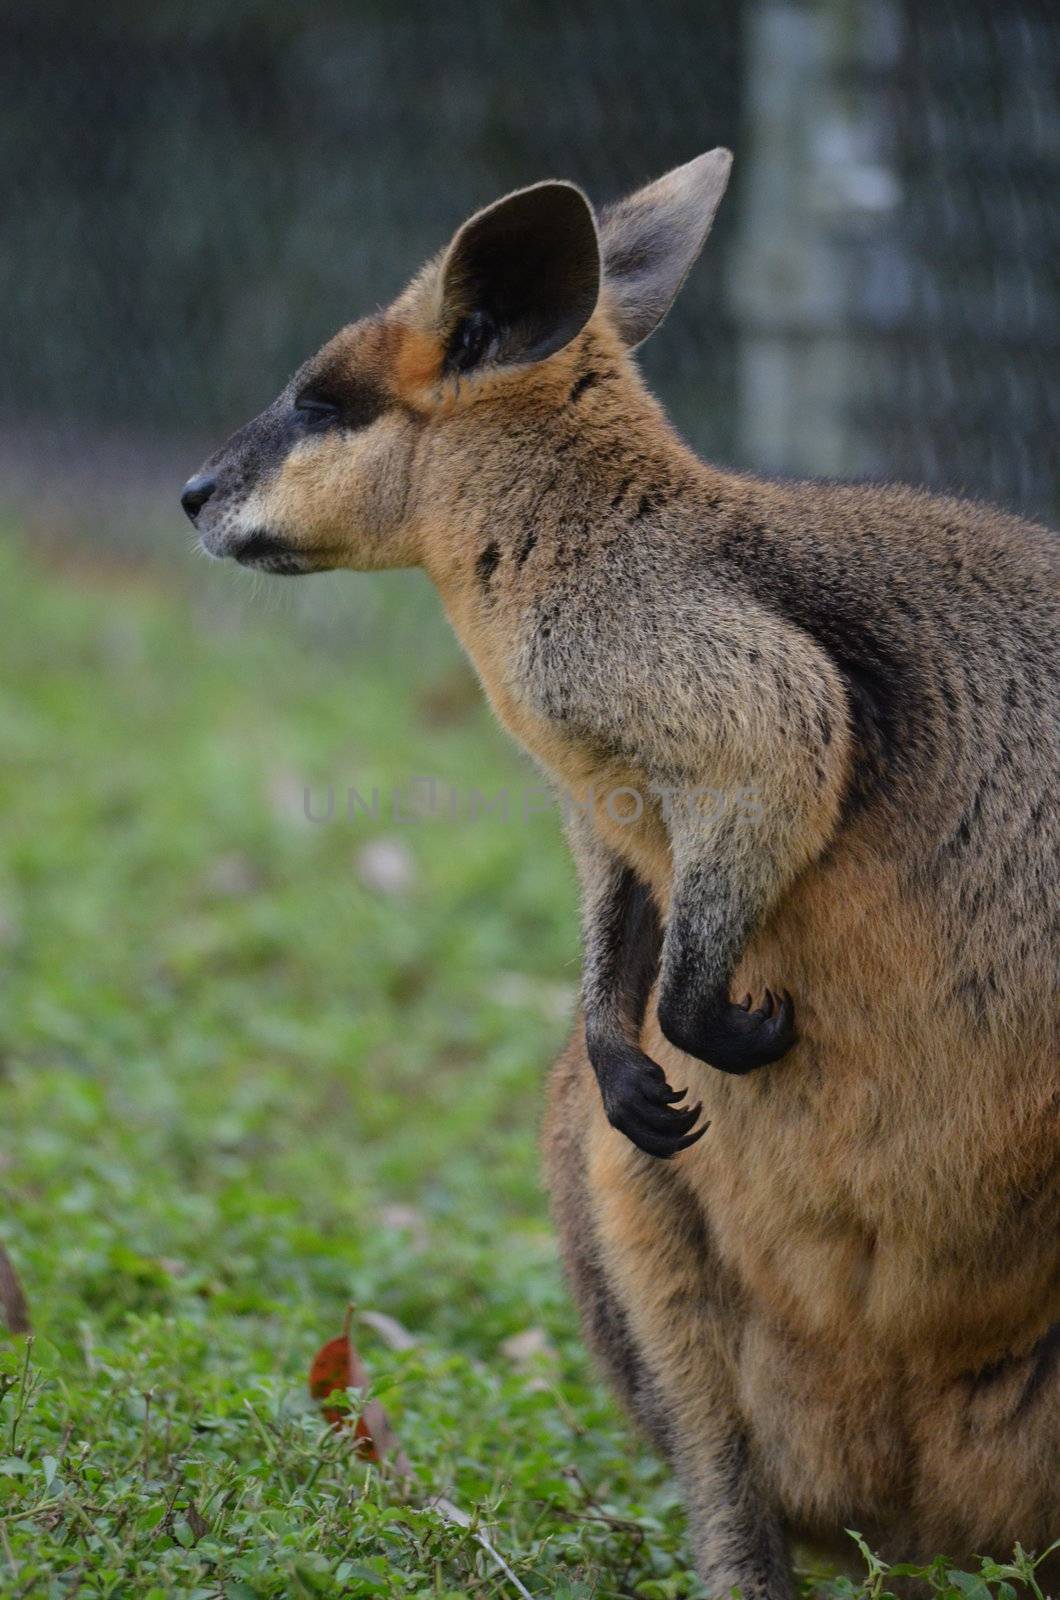 Side profile of a small Australian Wallaby standing